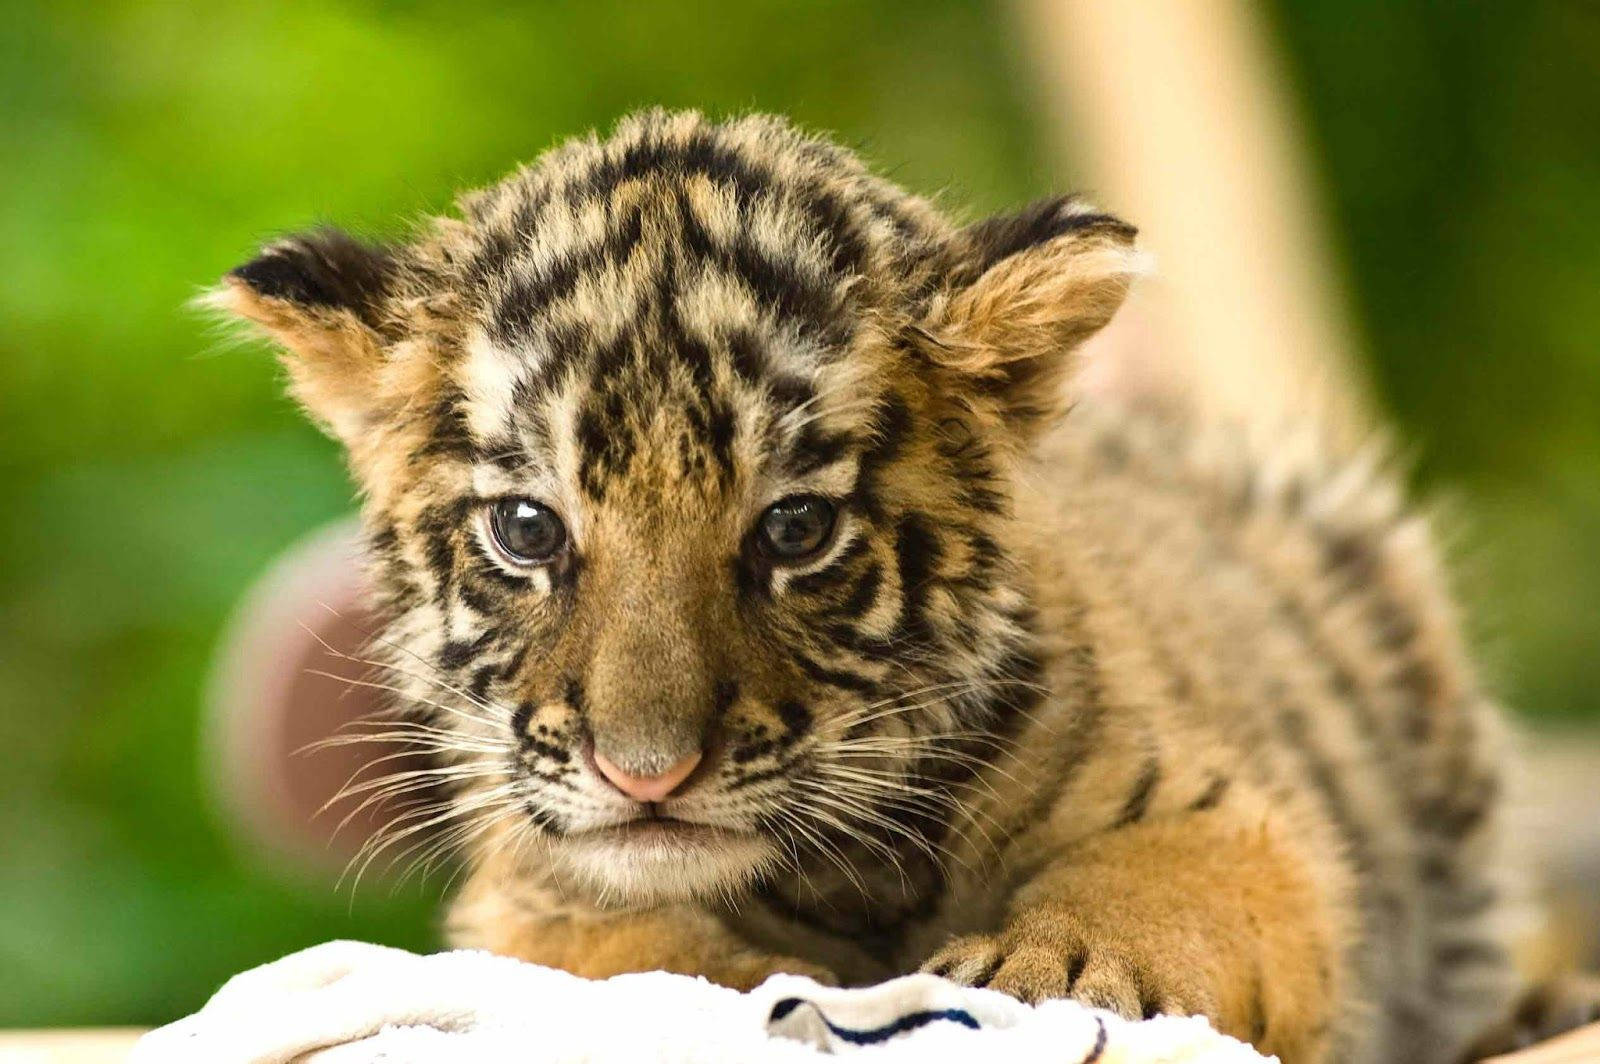 Baby Tiger With White Whiskers